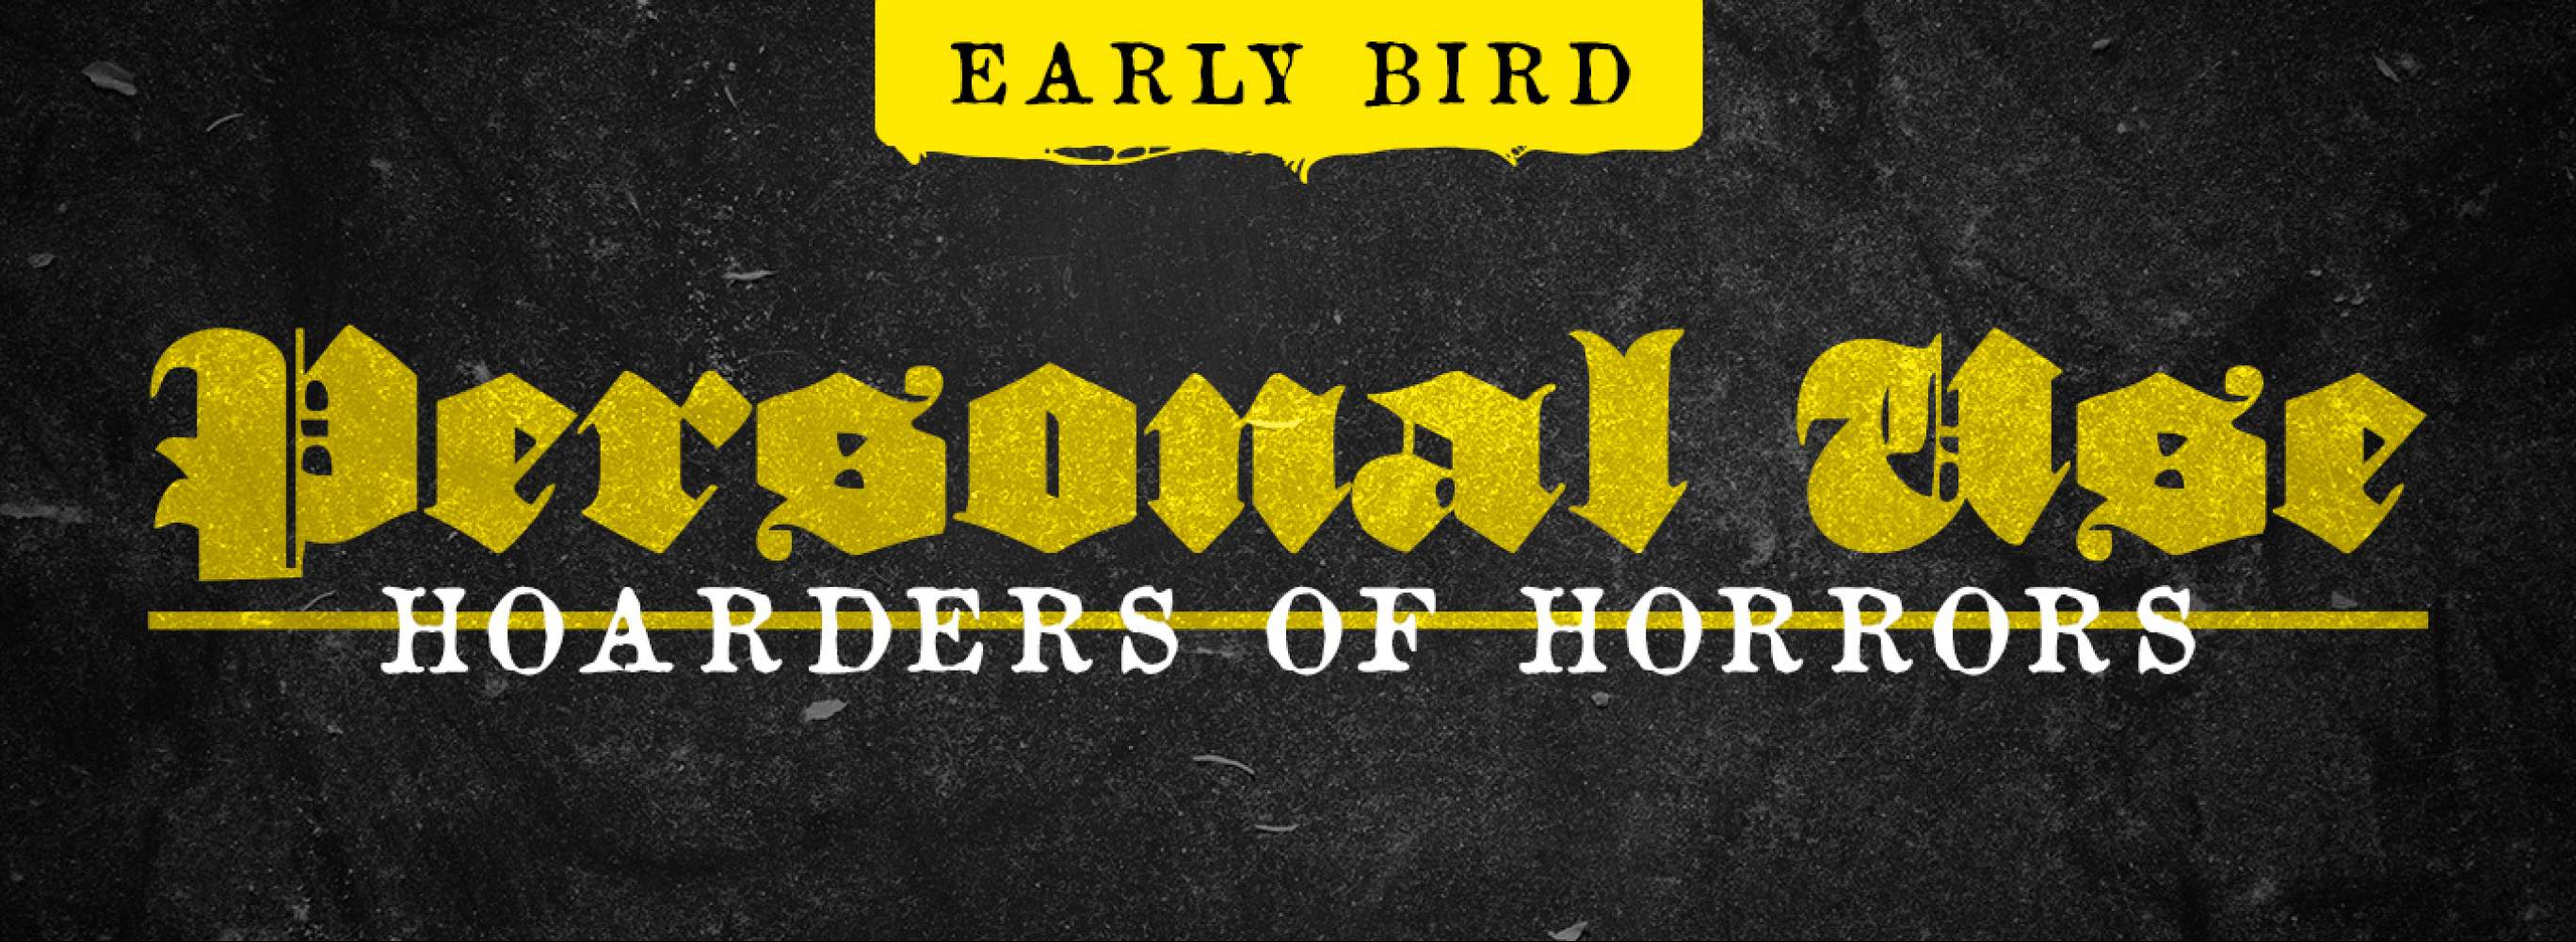 Hoarders Of Horrors (Early Bird)'s Cover